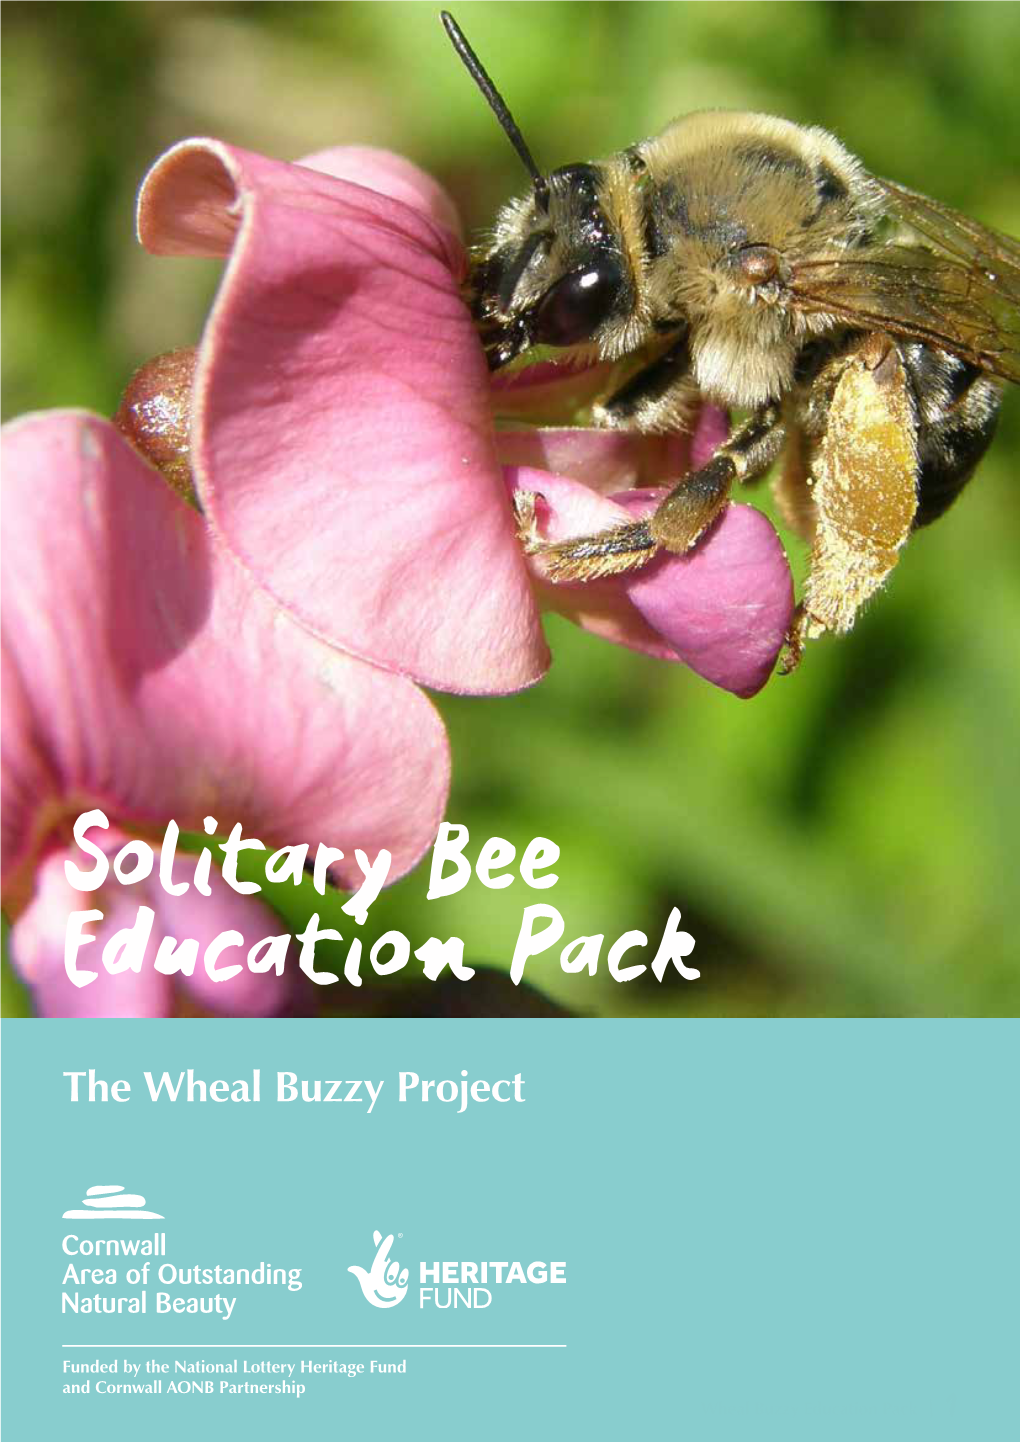 Solitary Bee Education Pack